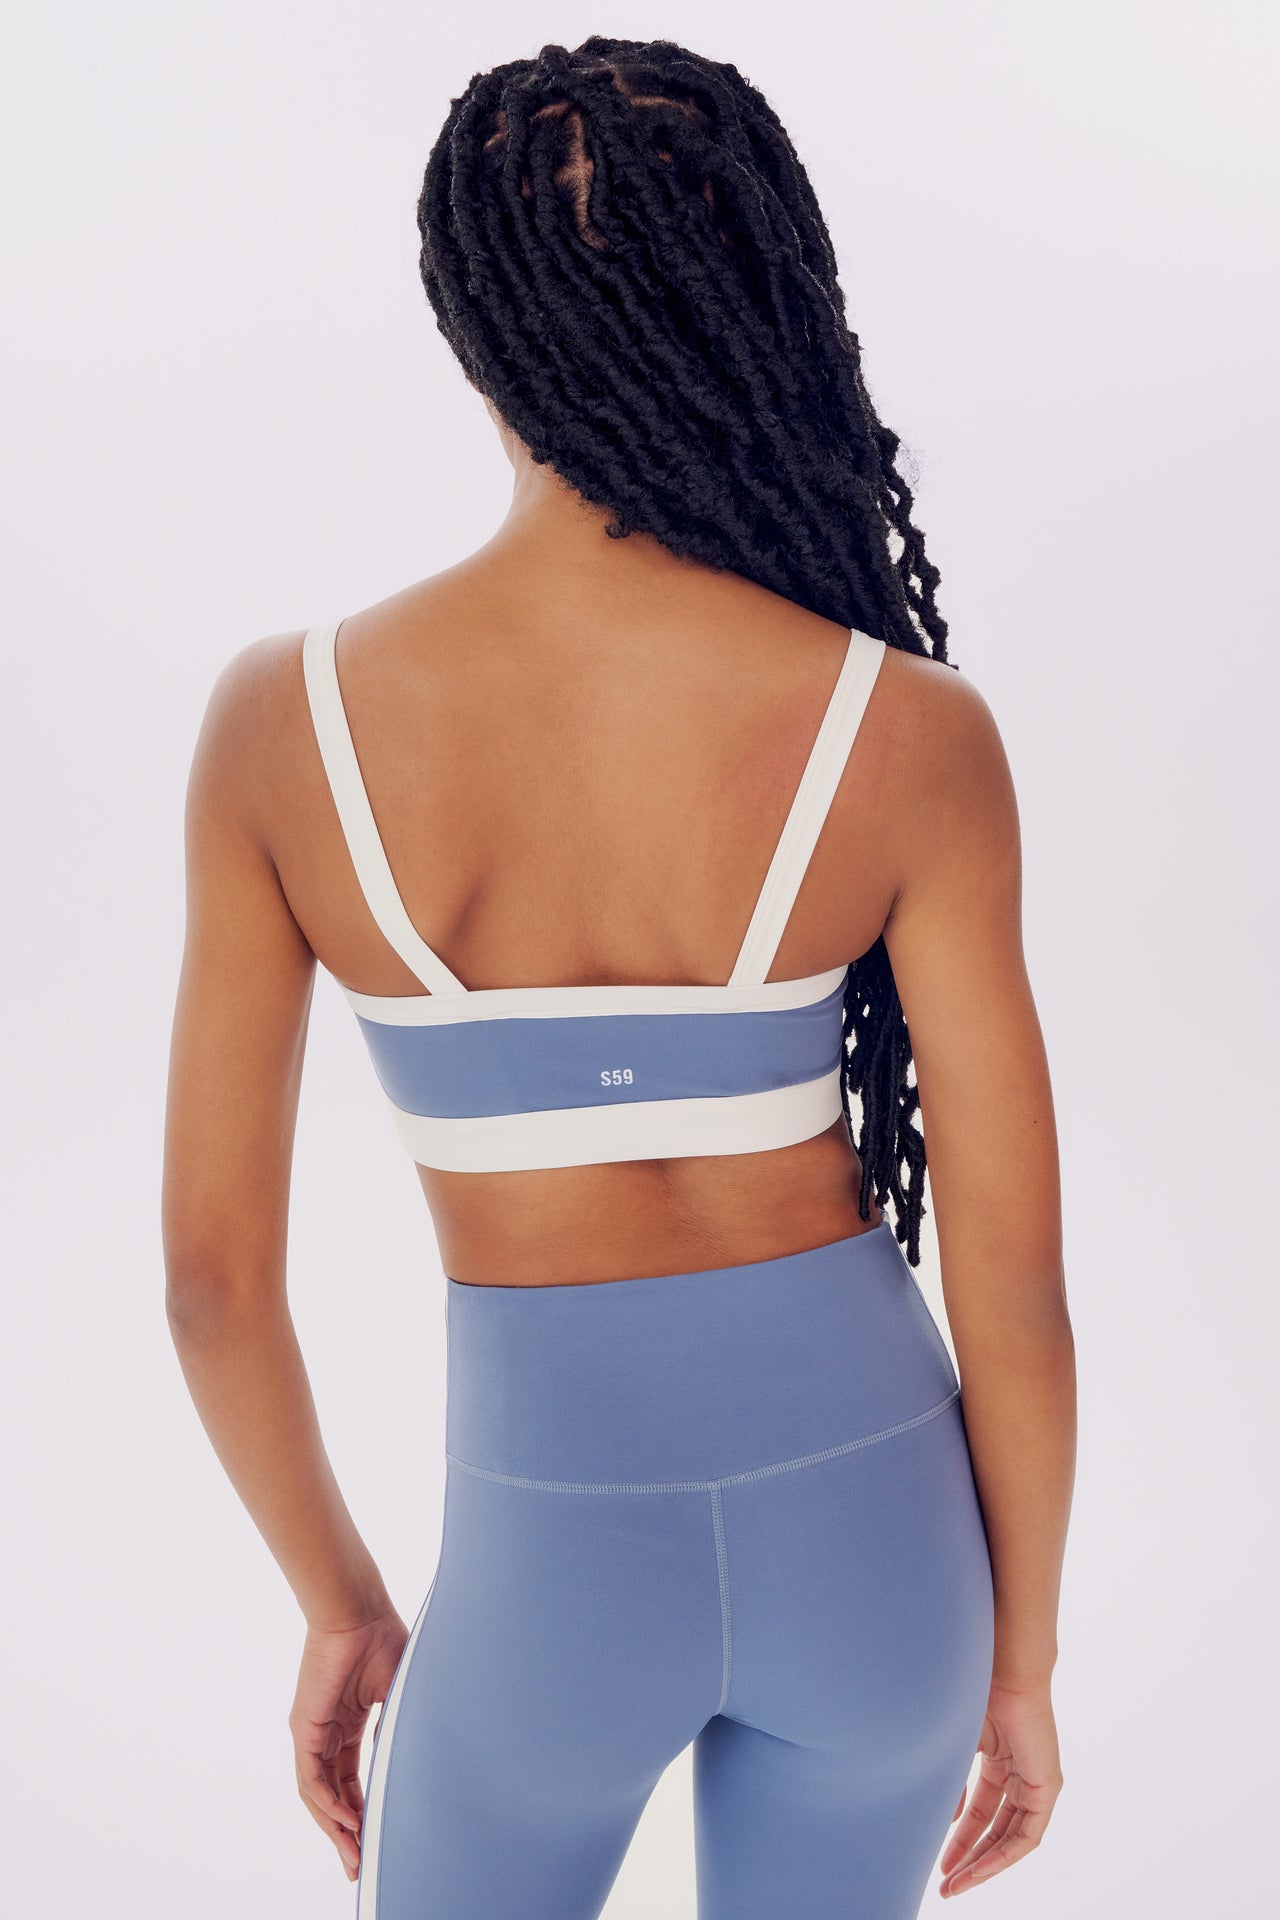 Rear view of a woman with braided hair wearing a SPLITS59 Monah Rigor Bra - Steel Blue/White and blue leggings standing against a plain background.